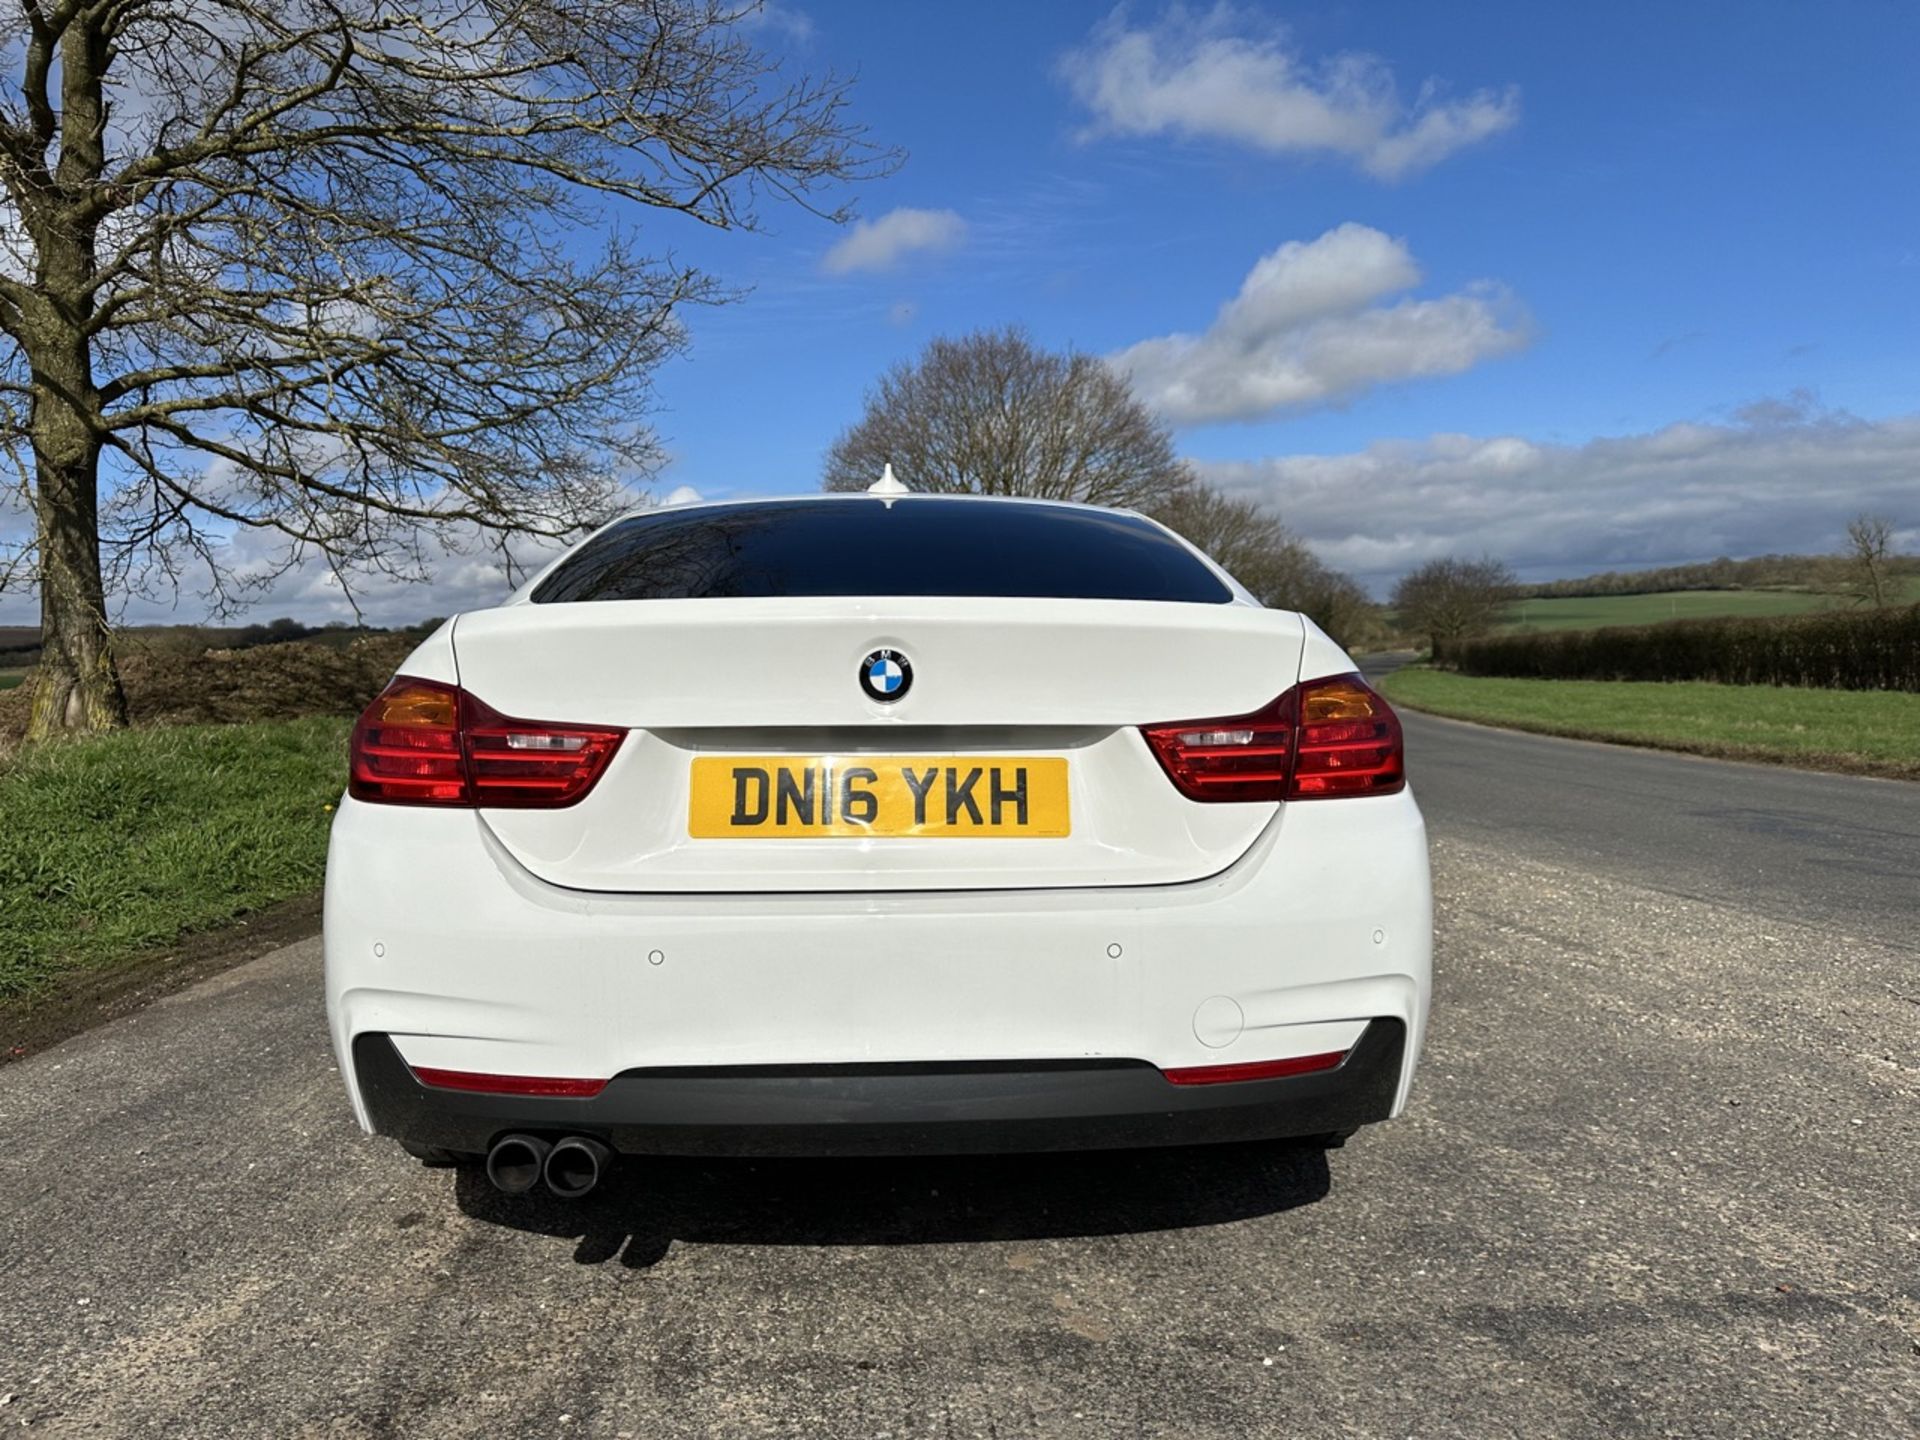 BMW 4 SERIES 420i M Sport 5dr [Professional Media] Manual - Petrol - 2.0 - Coupe- 54k miles - 2016 - Image 3 of 22